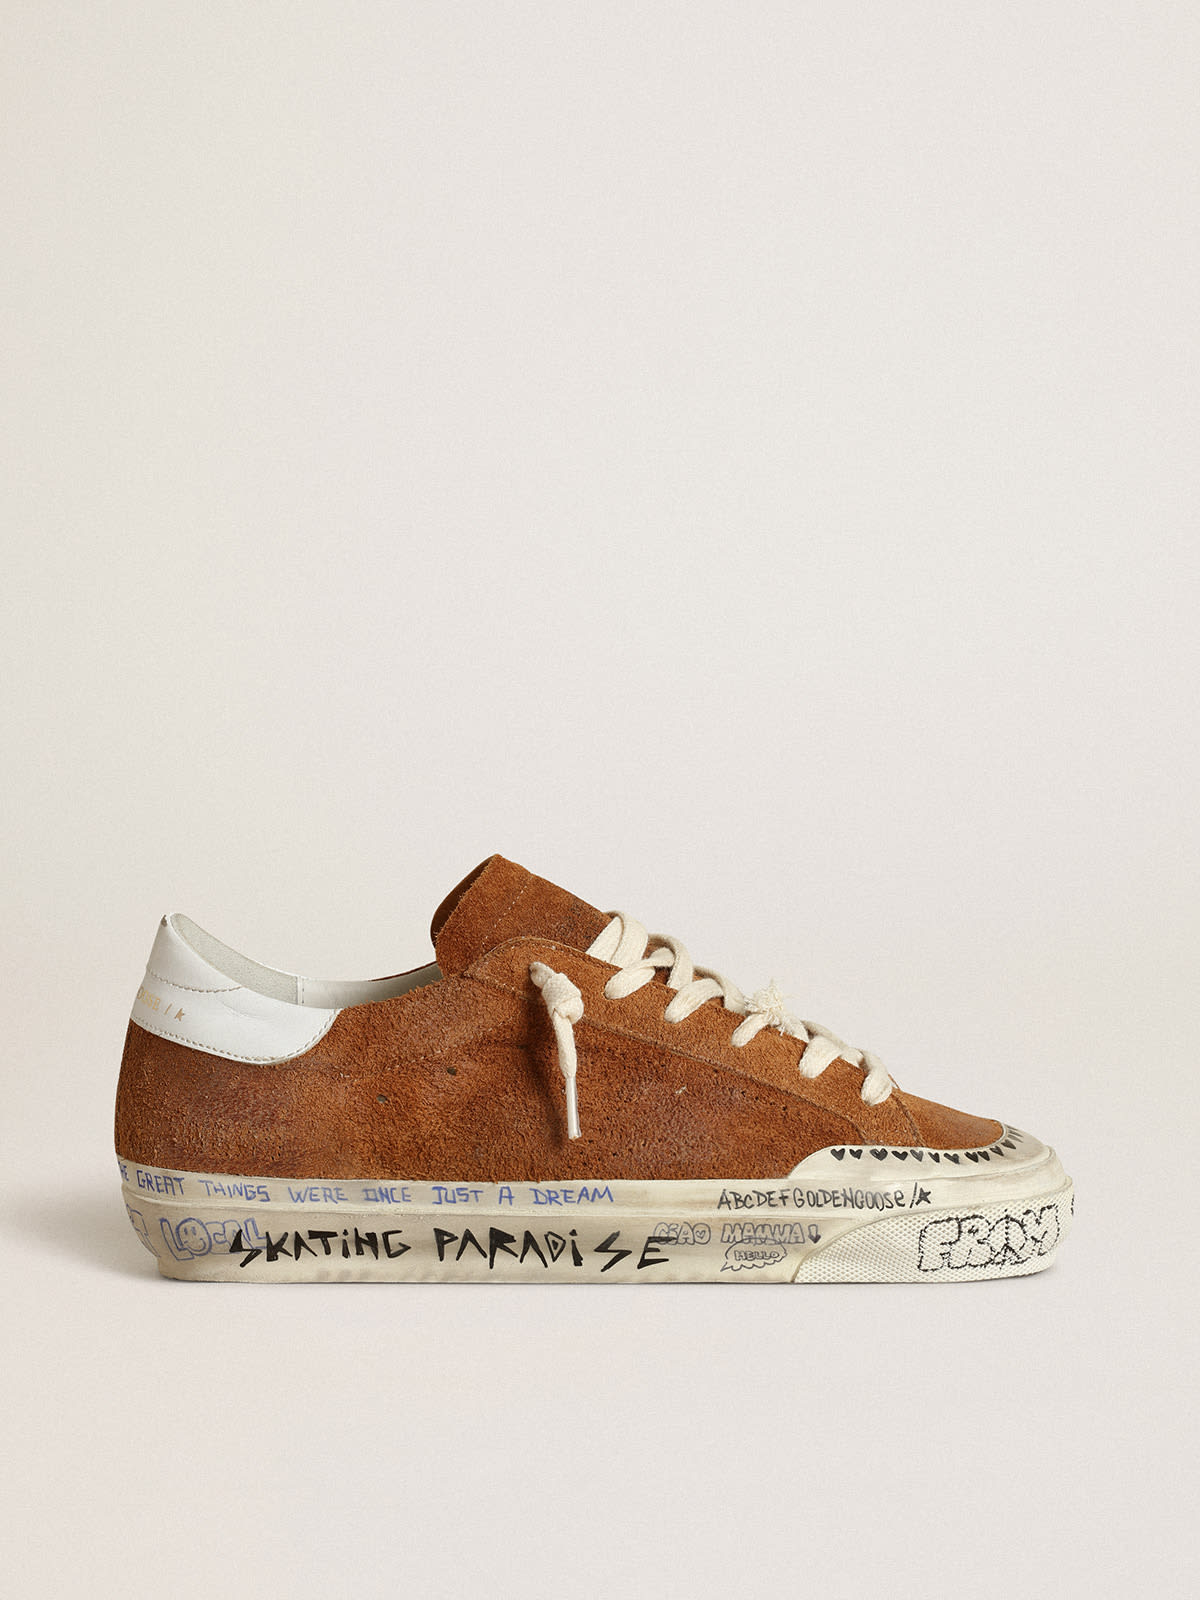 Golden Goose - Women’s Super-Star LTD in tan suede with a perforated star in 